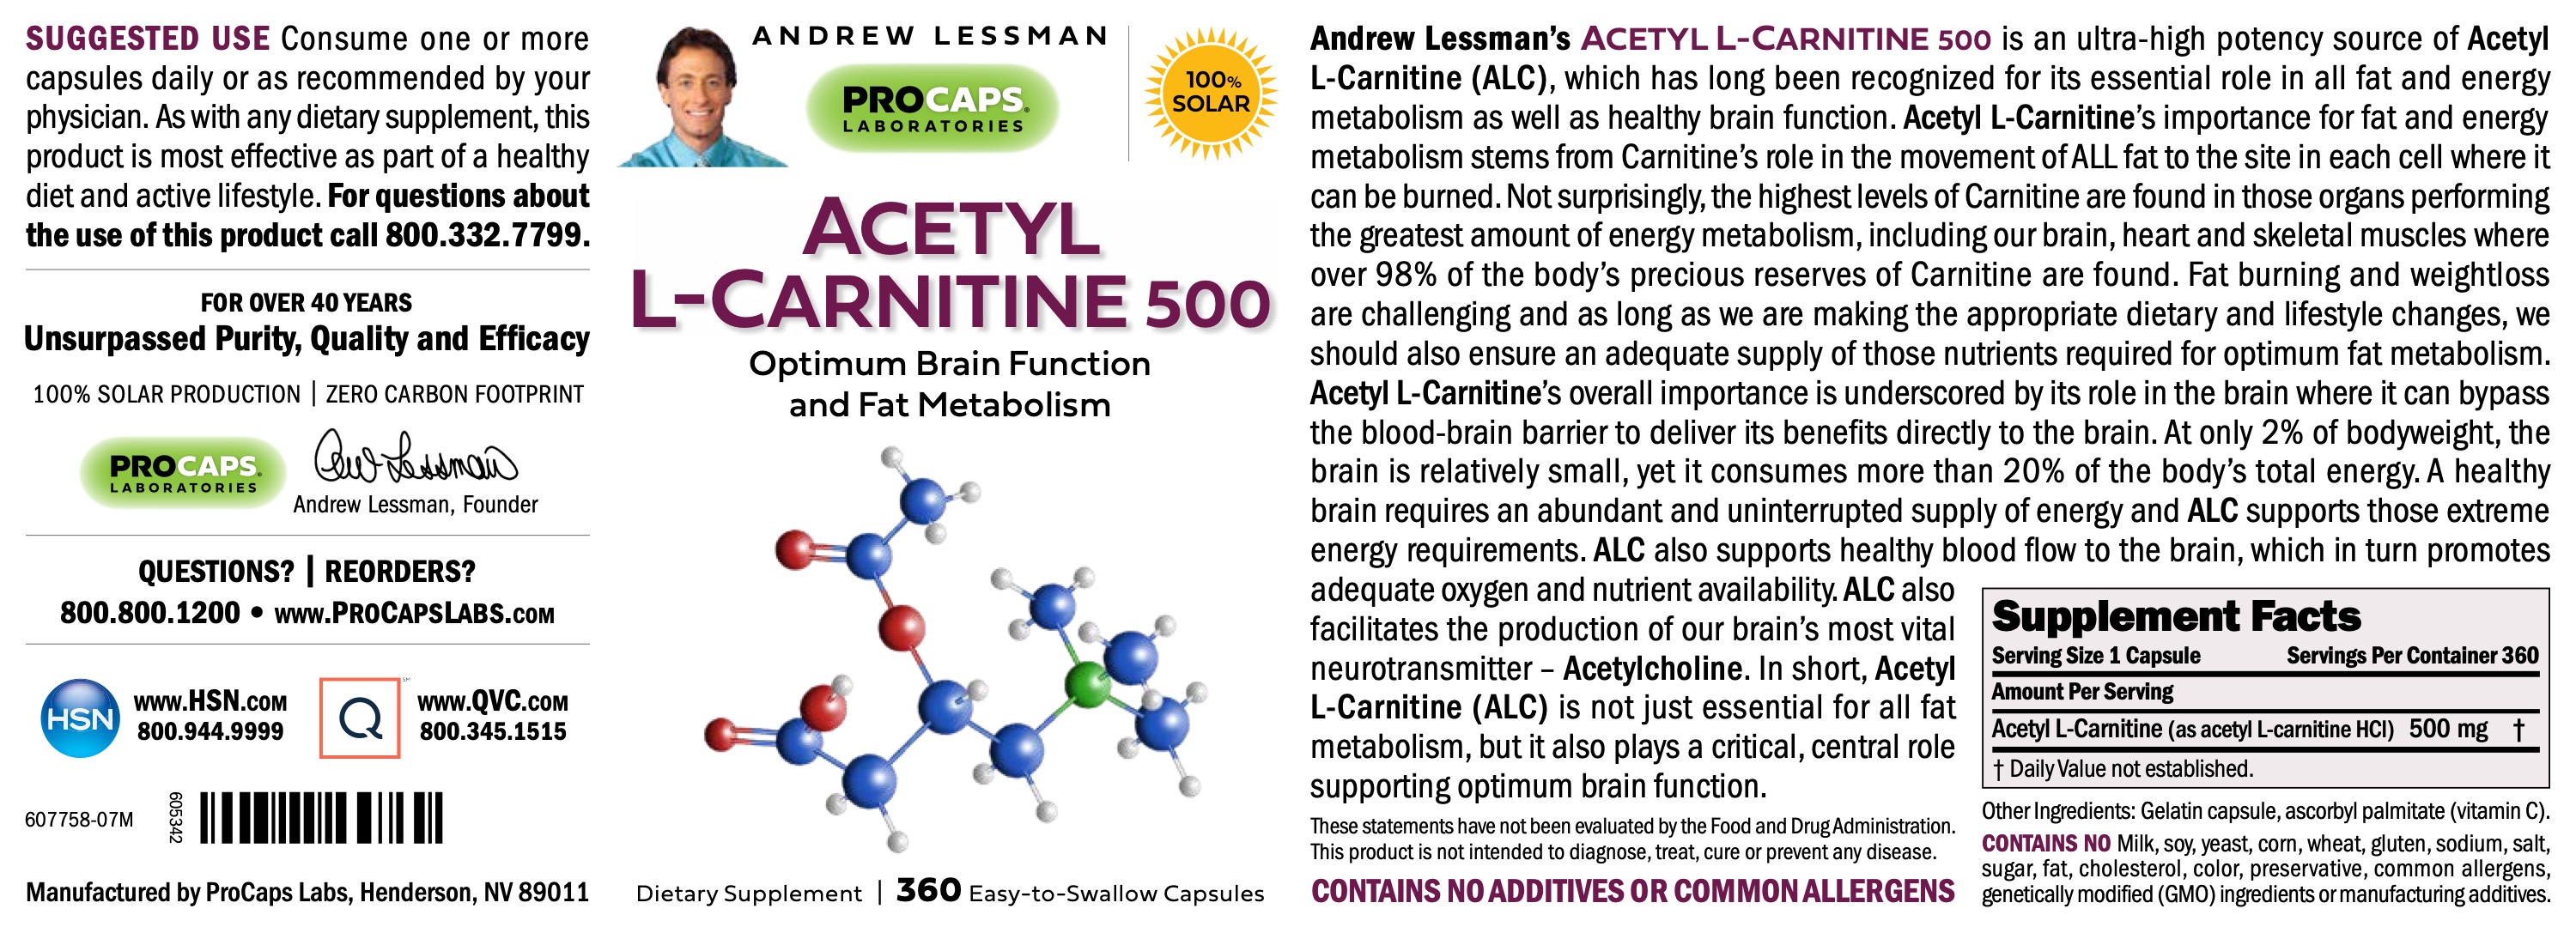 Acetyl-L-Carnitine-500-Capsules-Nervous-System-Support